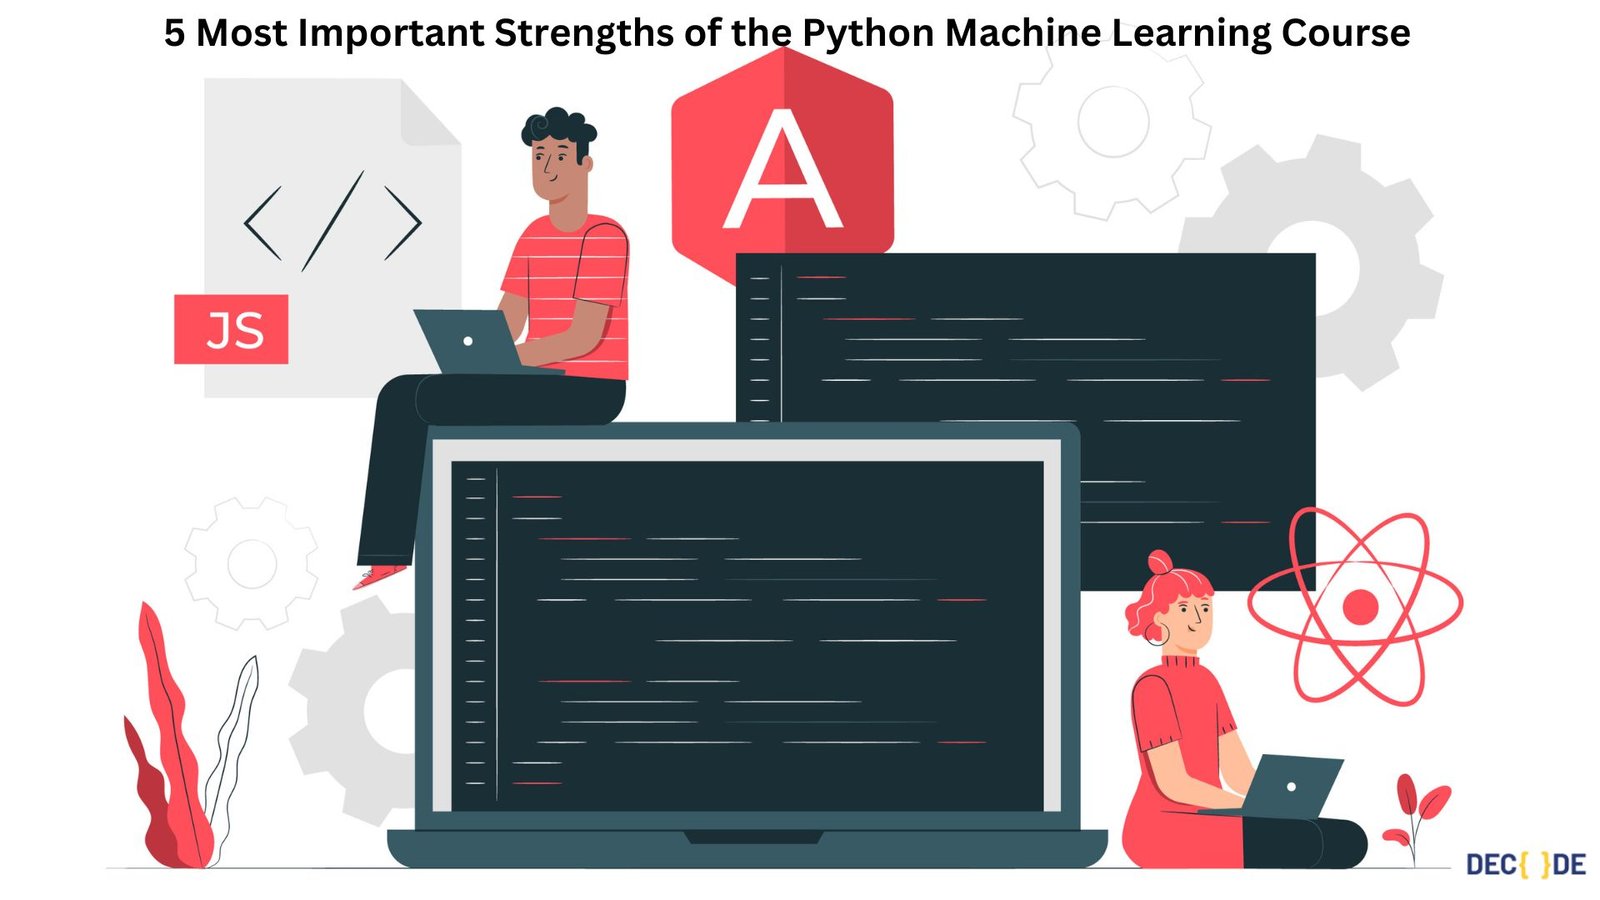 5 Most Important Strengths of the Python Machine Learning Course